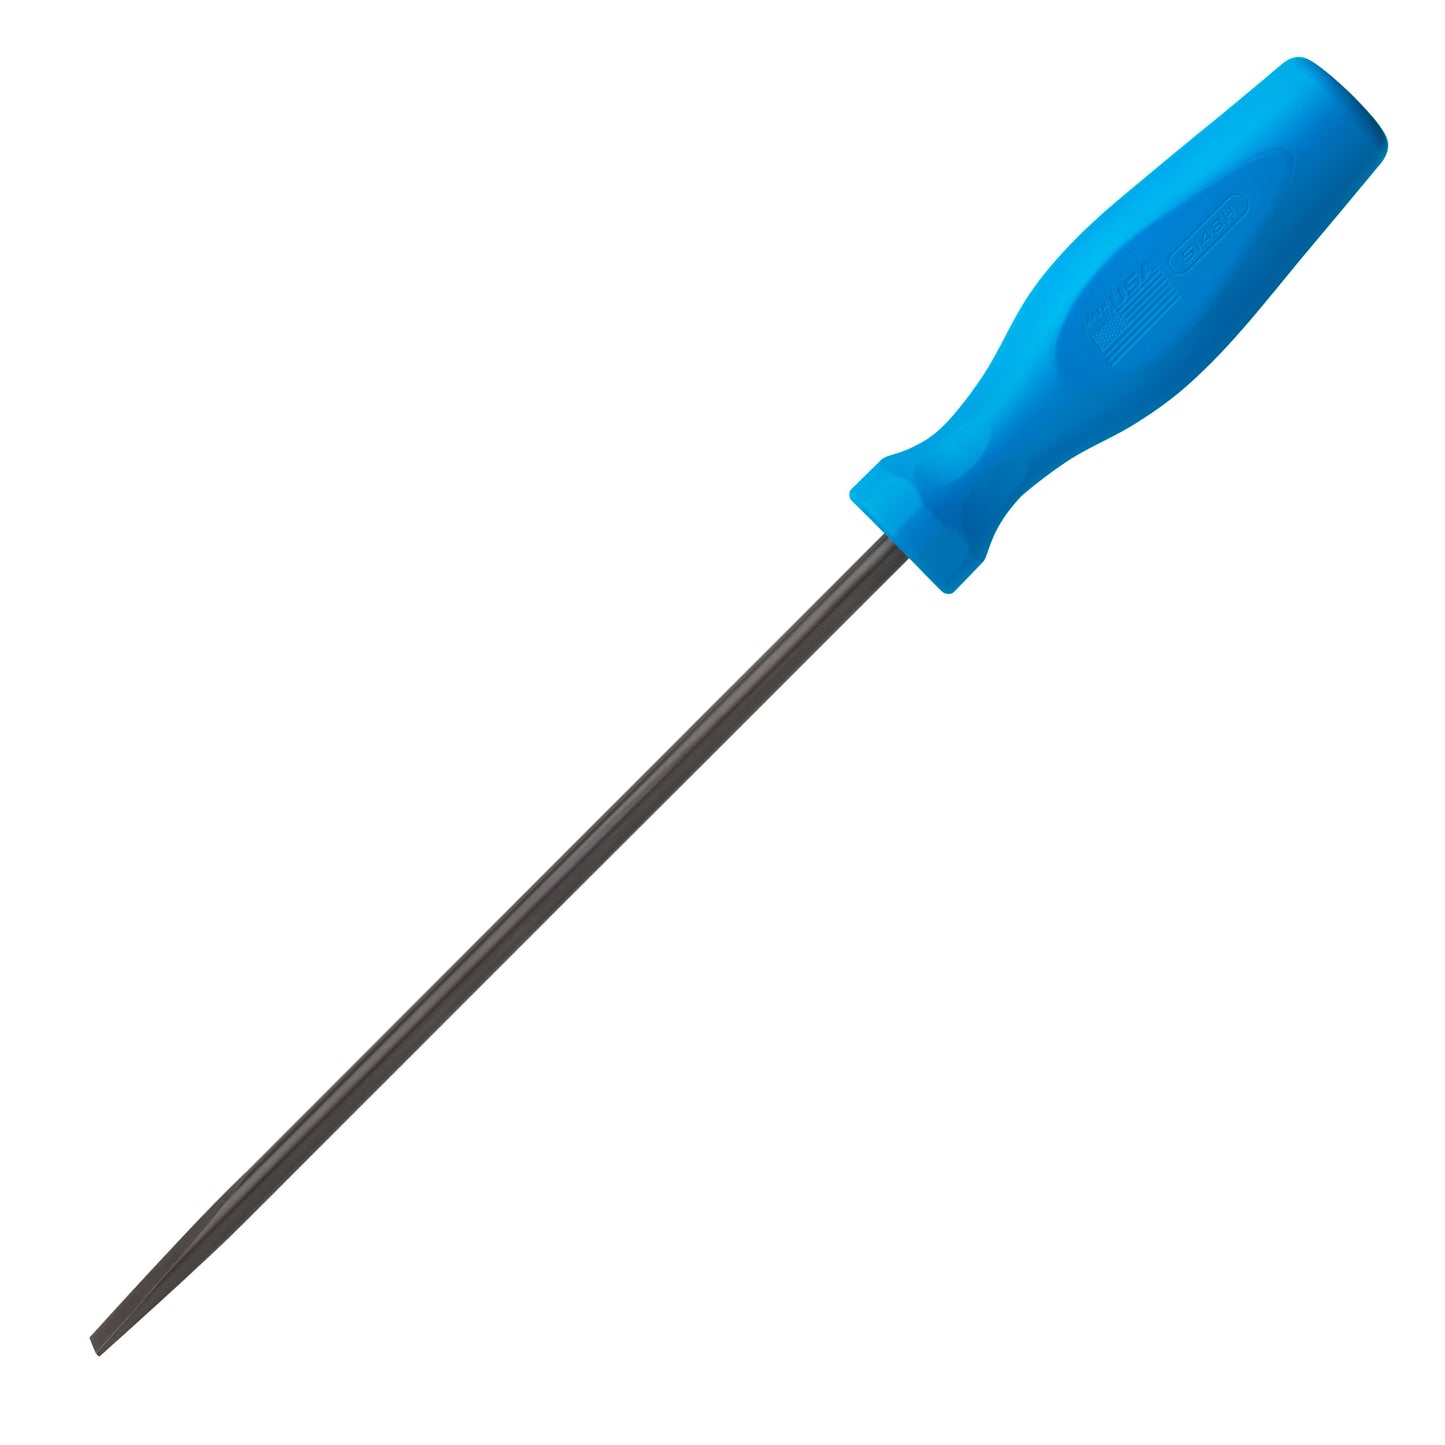 Slotted 1/4 x 8-inch Professional Screwdriver (S148H)